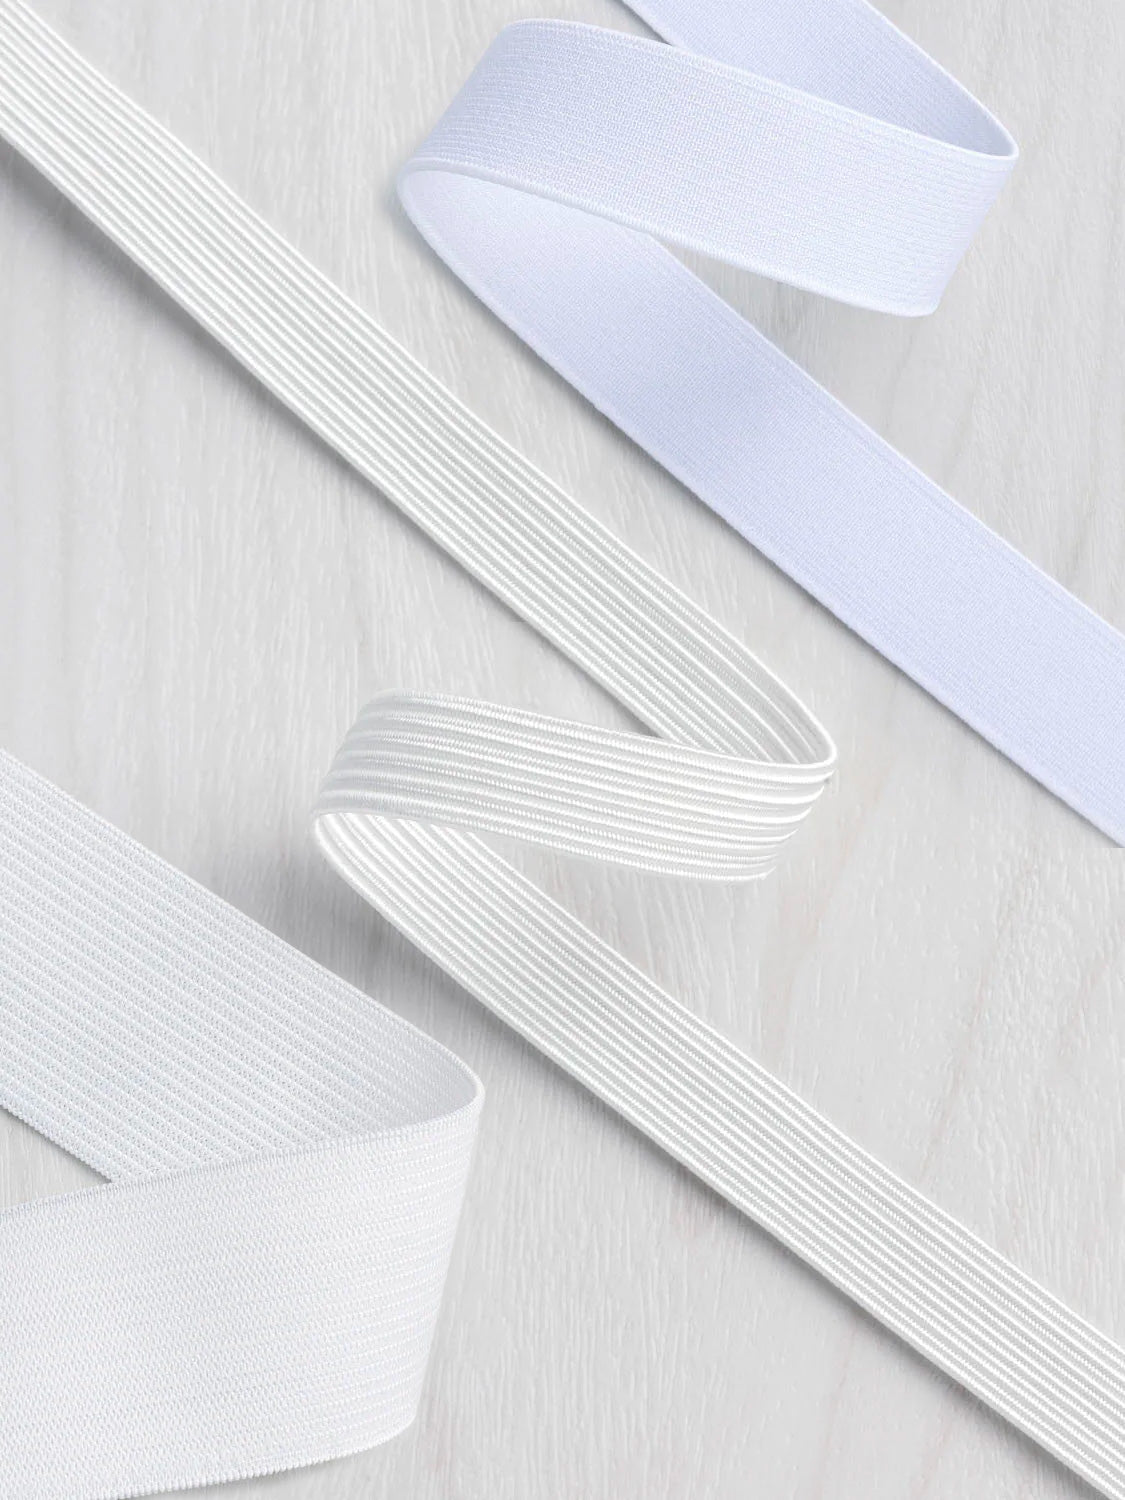 Choosing The Right Elastic For Your Project